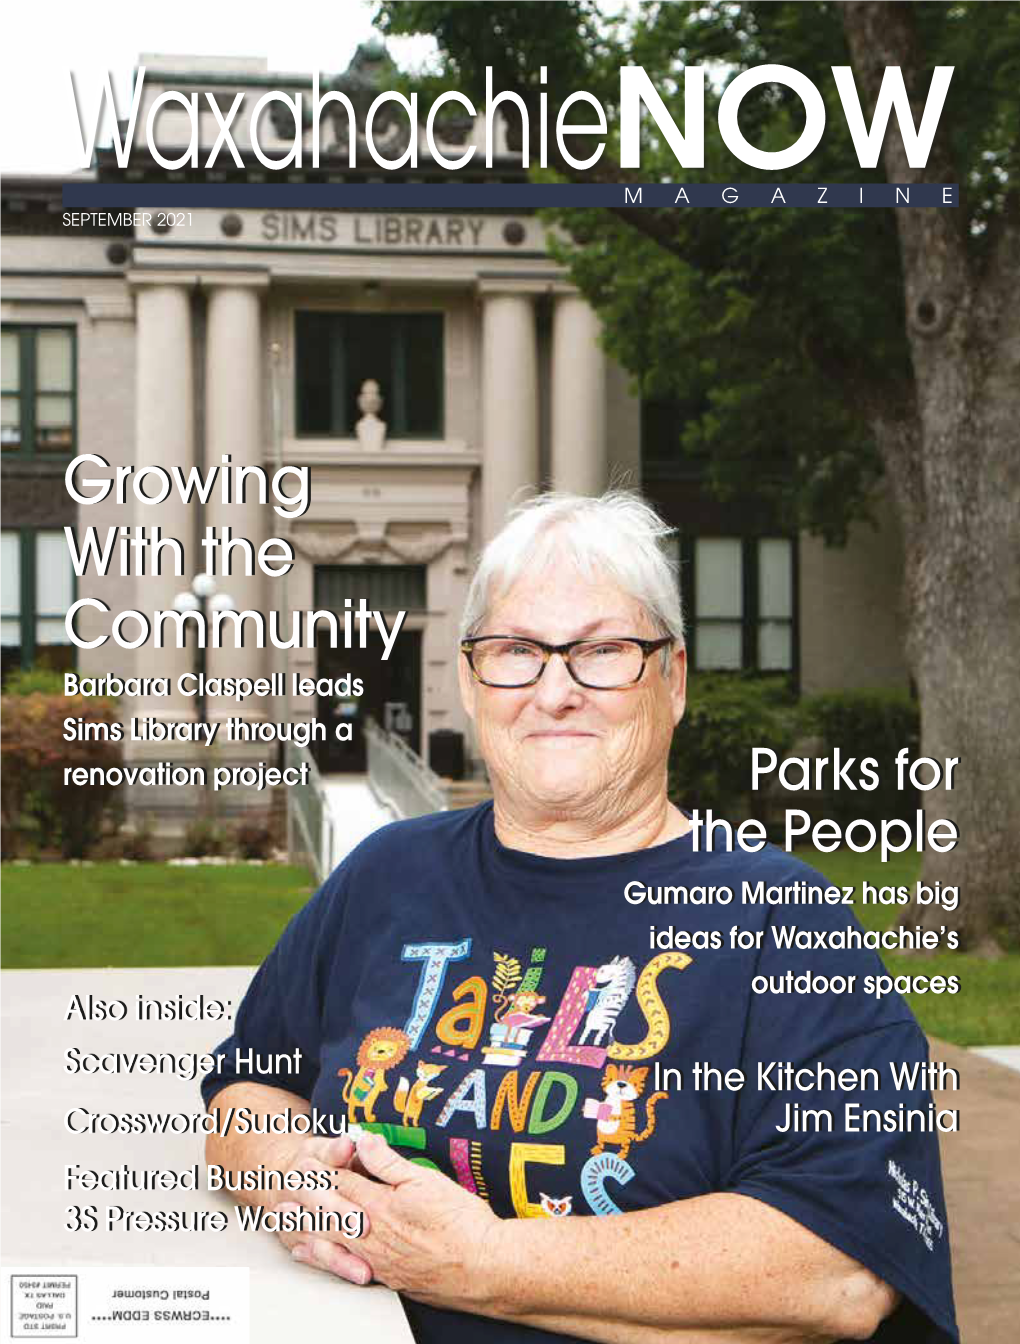 Waxahachienow September 2021 September 2021 | Volume 18, Issue 9 8 GROWING with the COMMUNITY the Historic Sims Library Has 21St Century Goals! 14 PARKS FOR